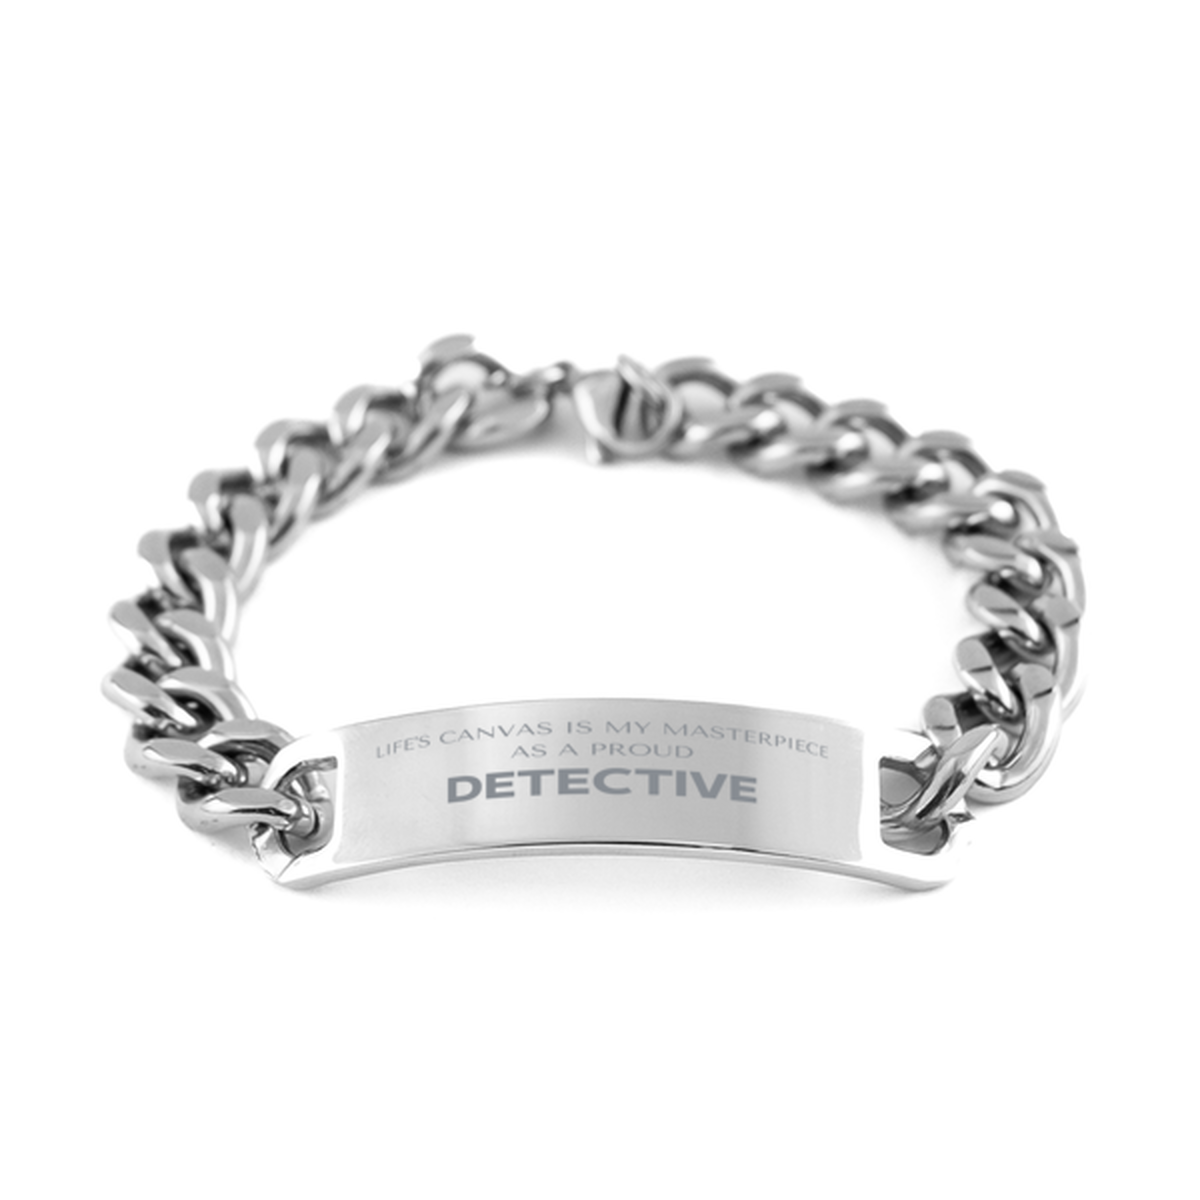 Proud Detective Gifts, Life's canvas is my masterpiece, Epic Birthday Christmas Unique Cuban Chain Stainless Steel Bracelet For Detective, Coworkers, Men, Women, Friends